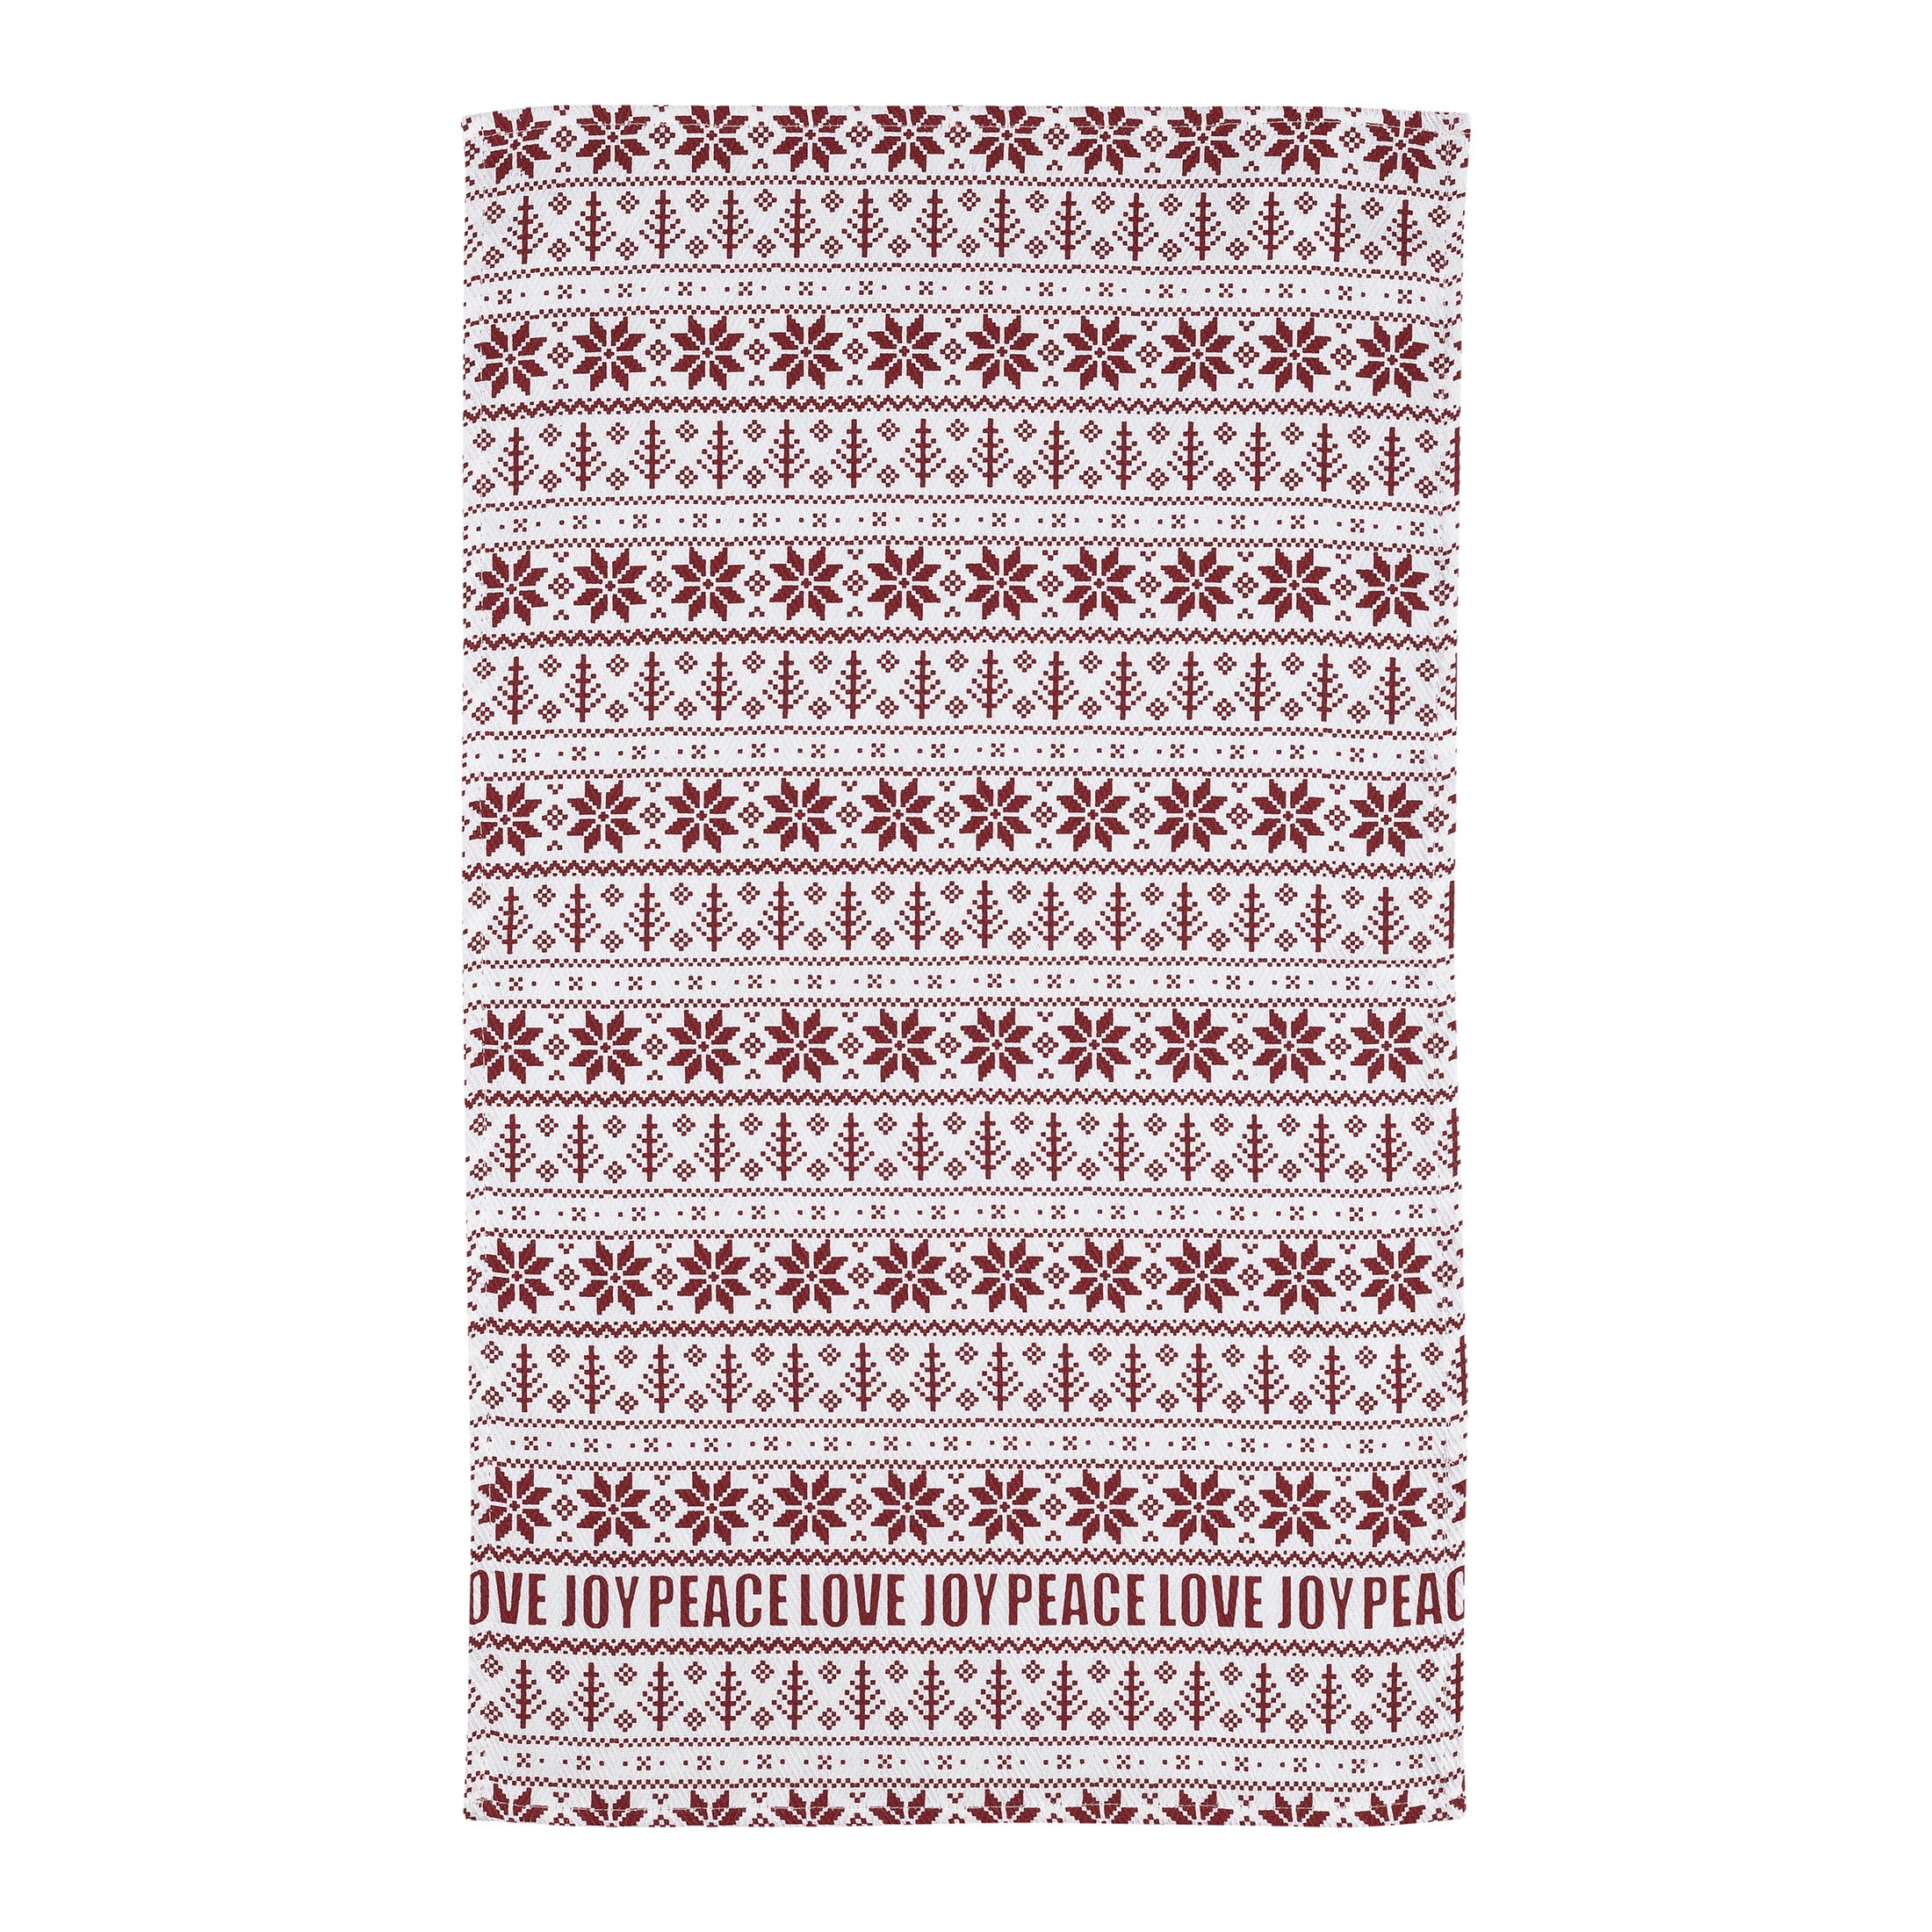 Holiday Campground – Kitchen Tea Towel